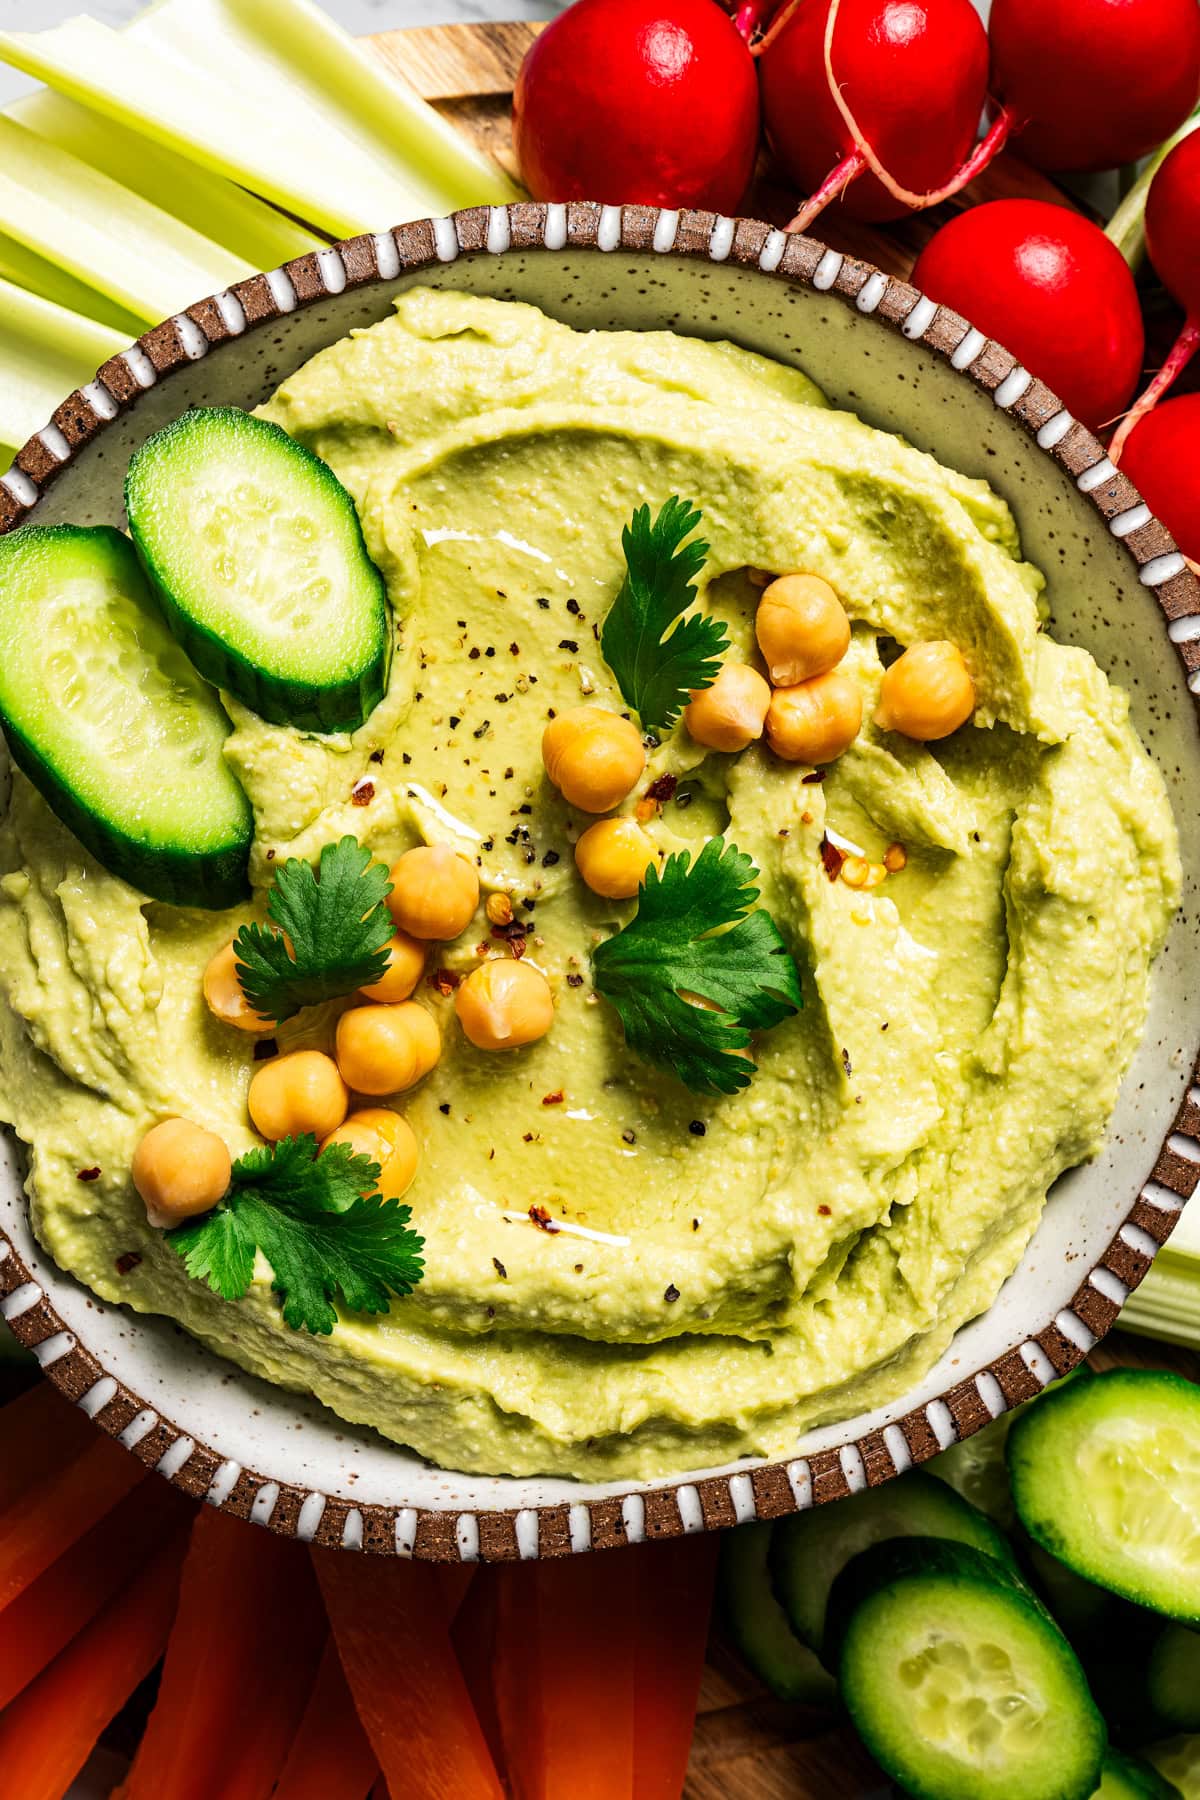 A bowl of avocado hummus garnished with chickpeas, cucumber slices, and parsley, surrounded by crudites.